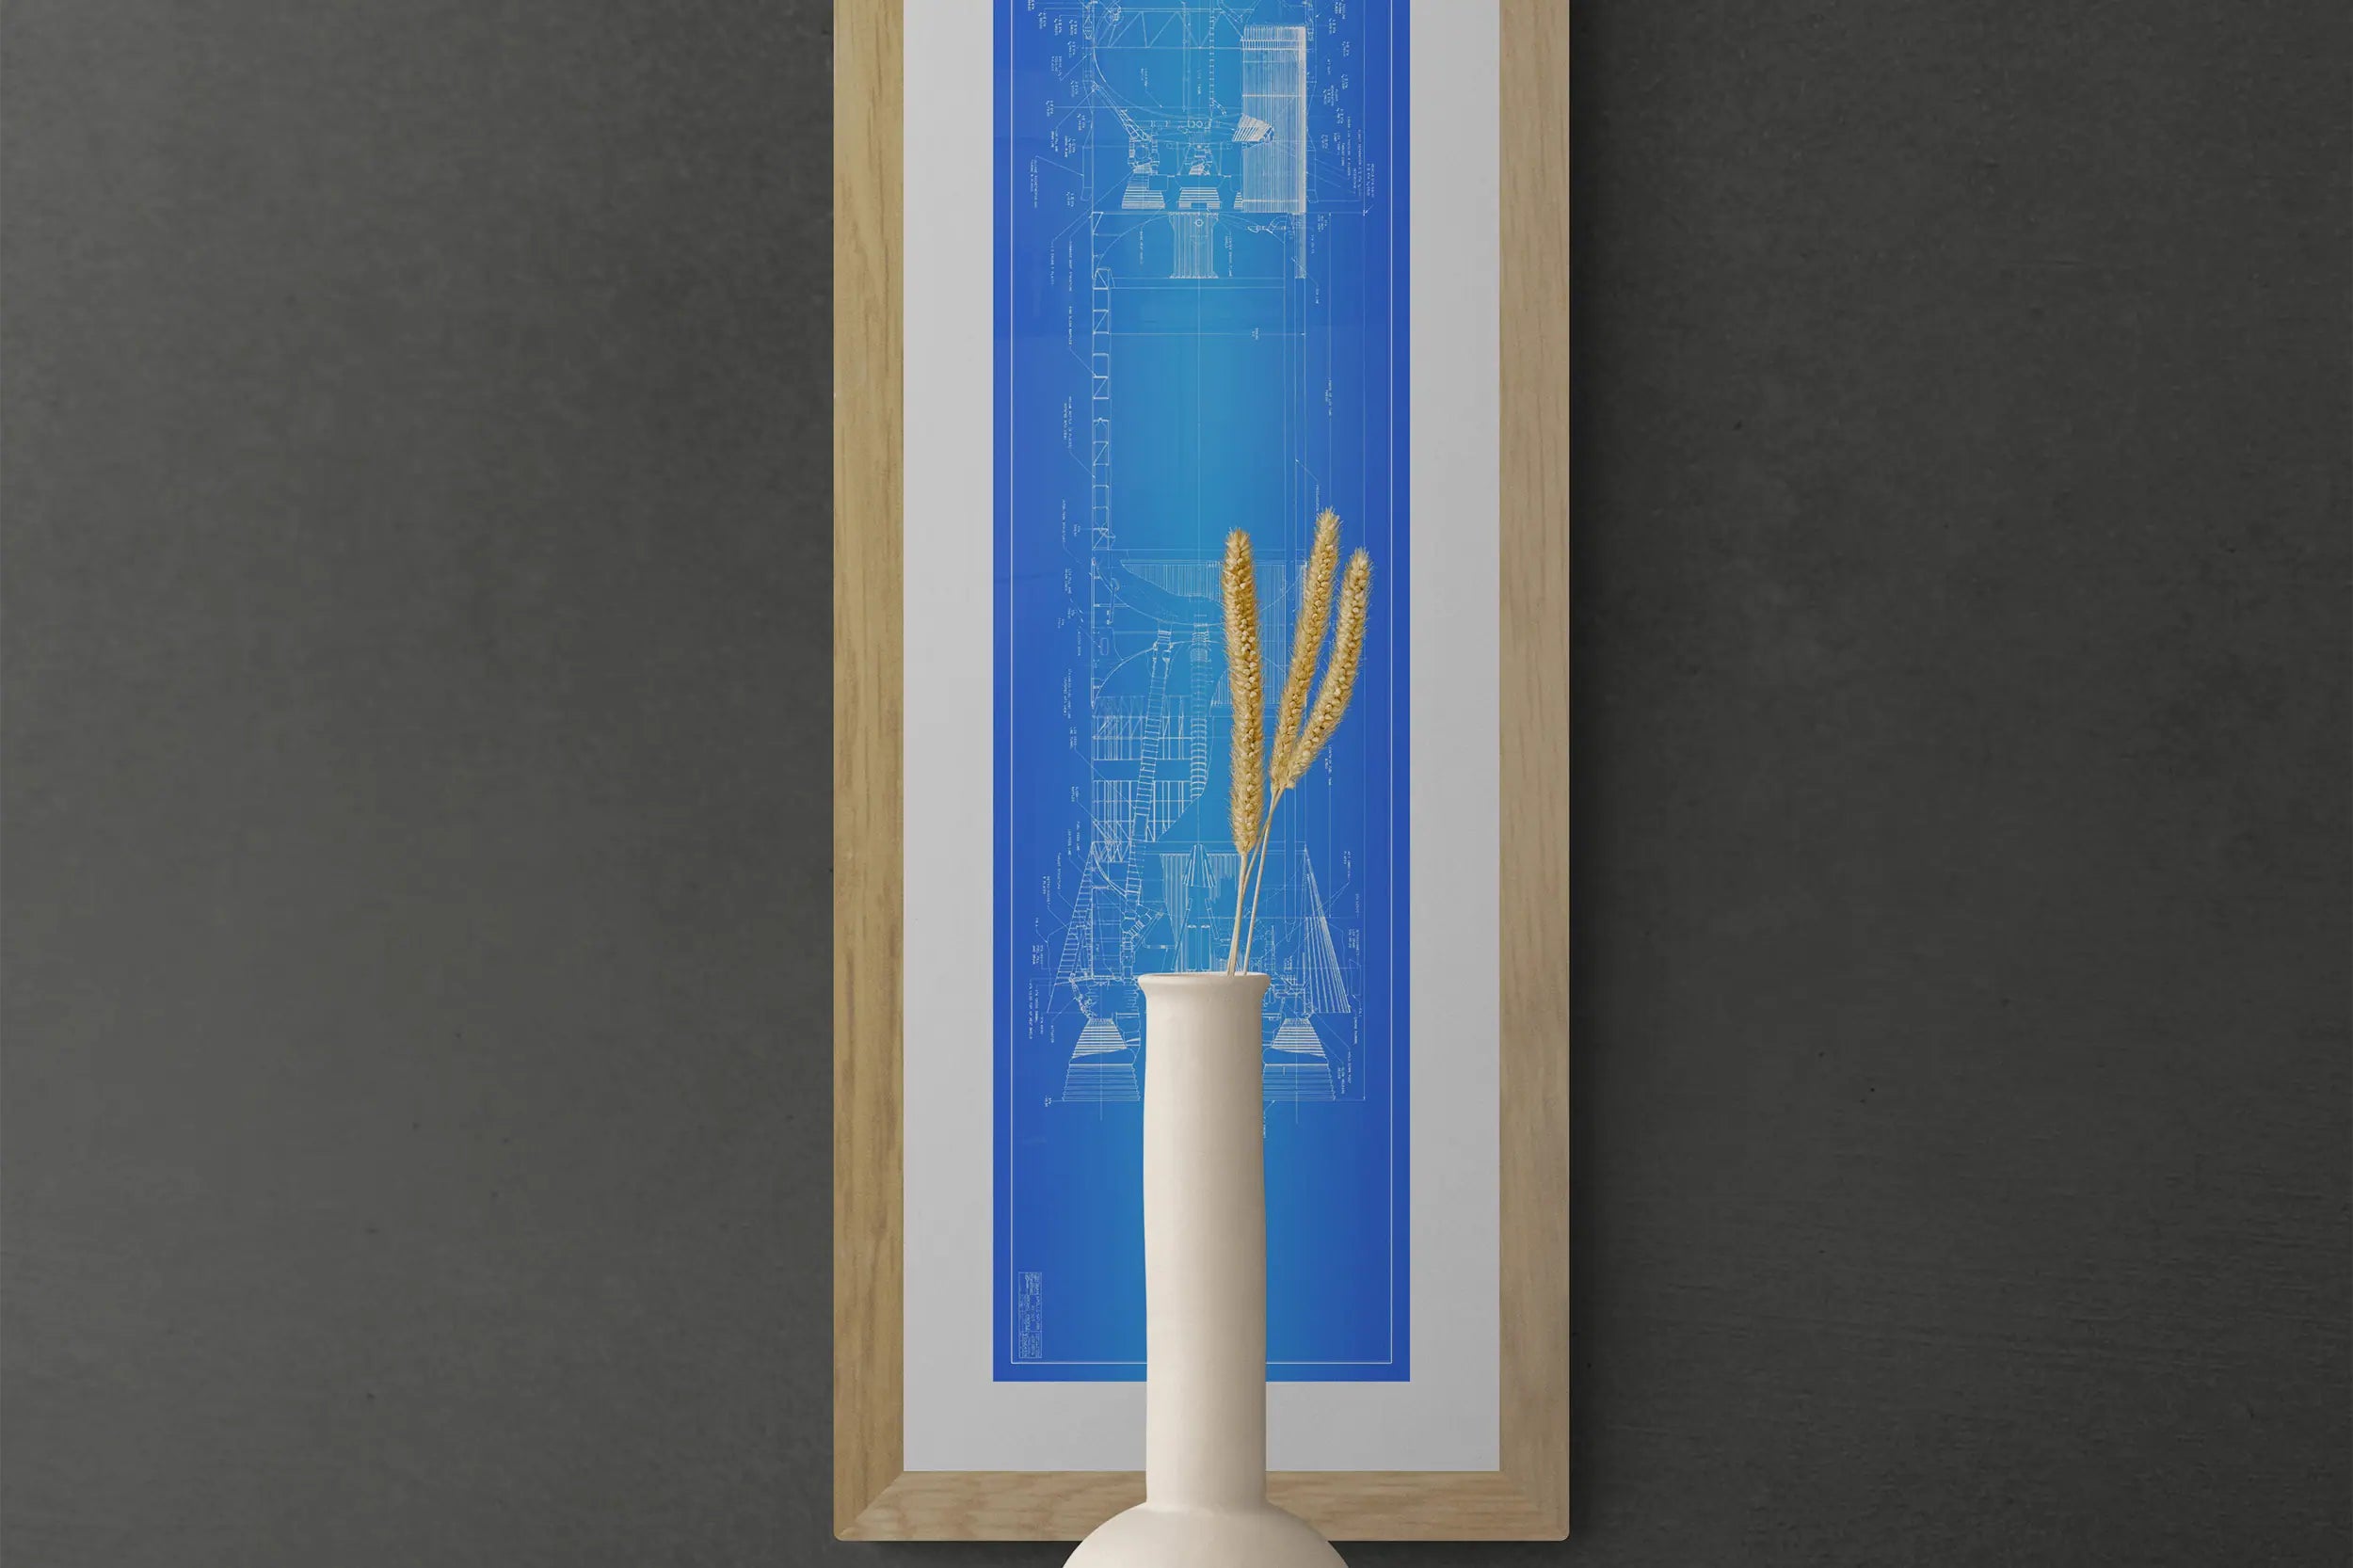 Rocket Posters | NASA | Saturn V | The image features a vertical framed Saturn V rocket blueprint poster with a wooden frame on a dark gray wall. Detailed technical drawings in blue are visible. A white vase with dried wheat stalks is positioned at the bottom center of the poster.